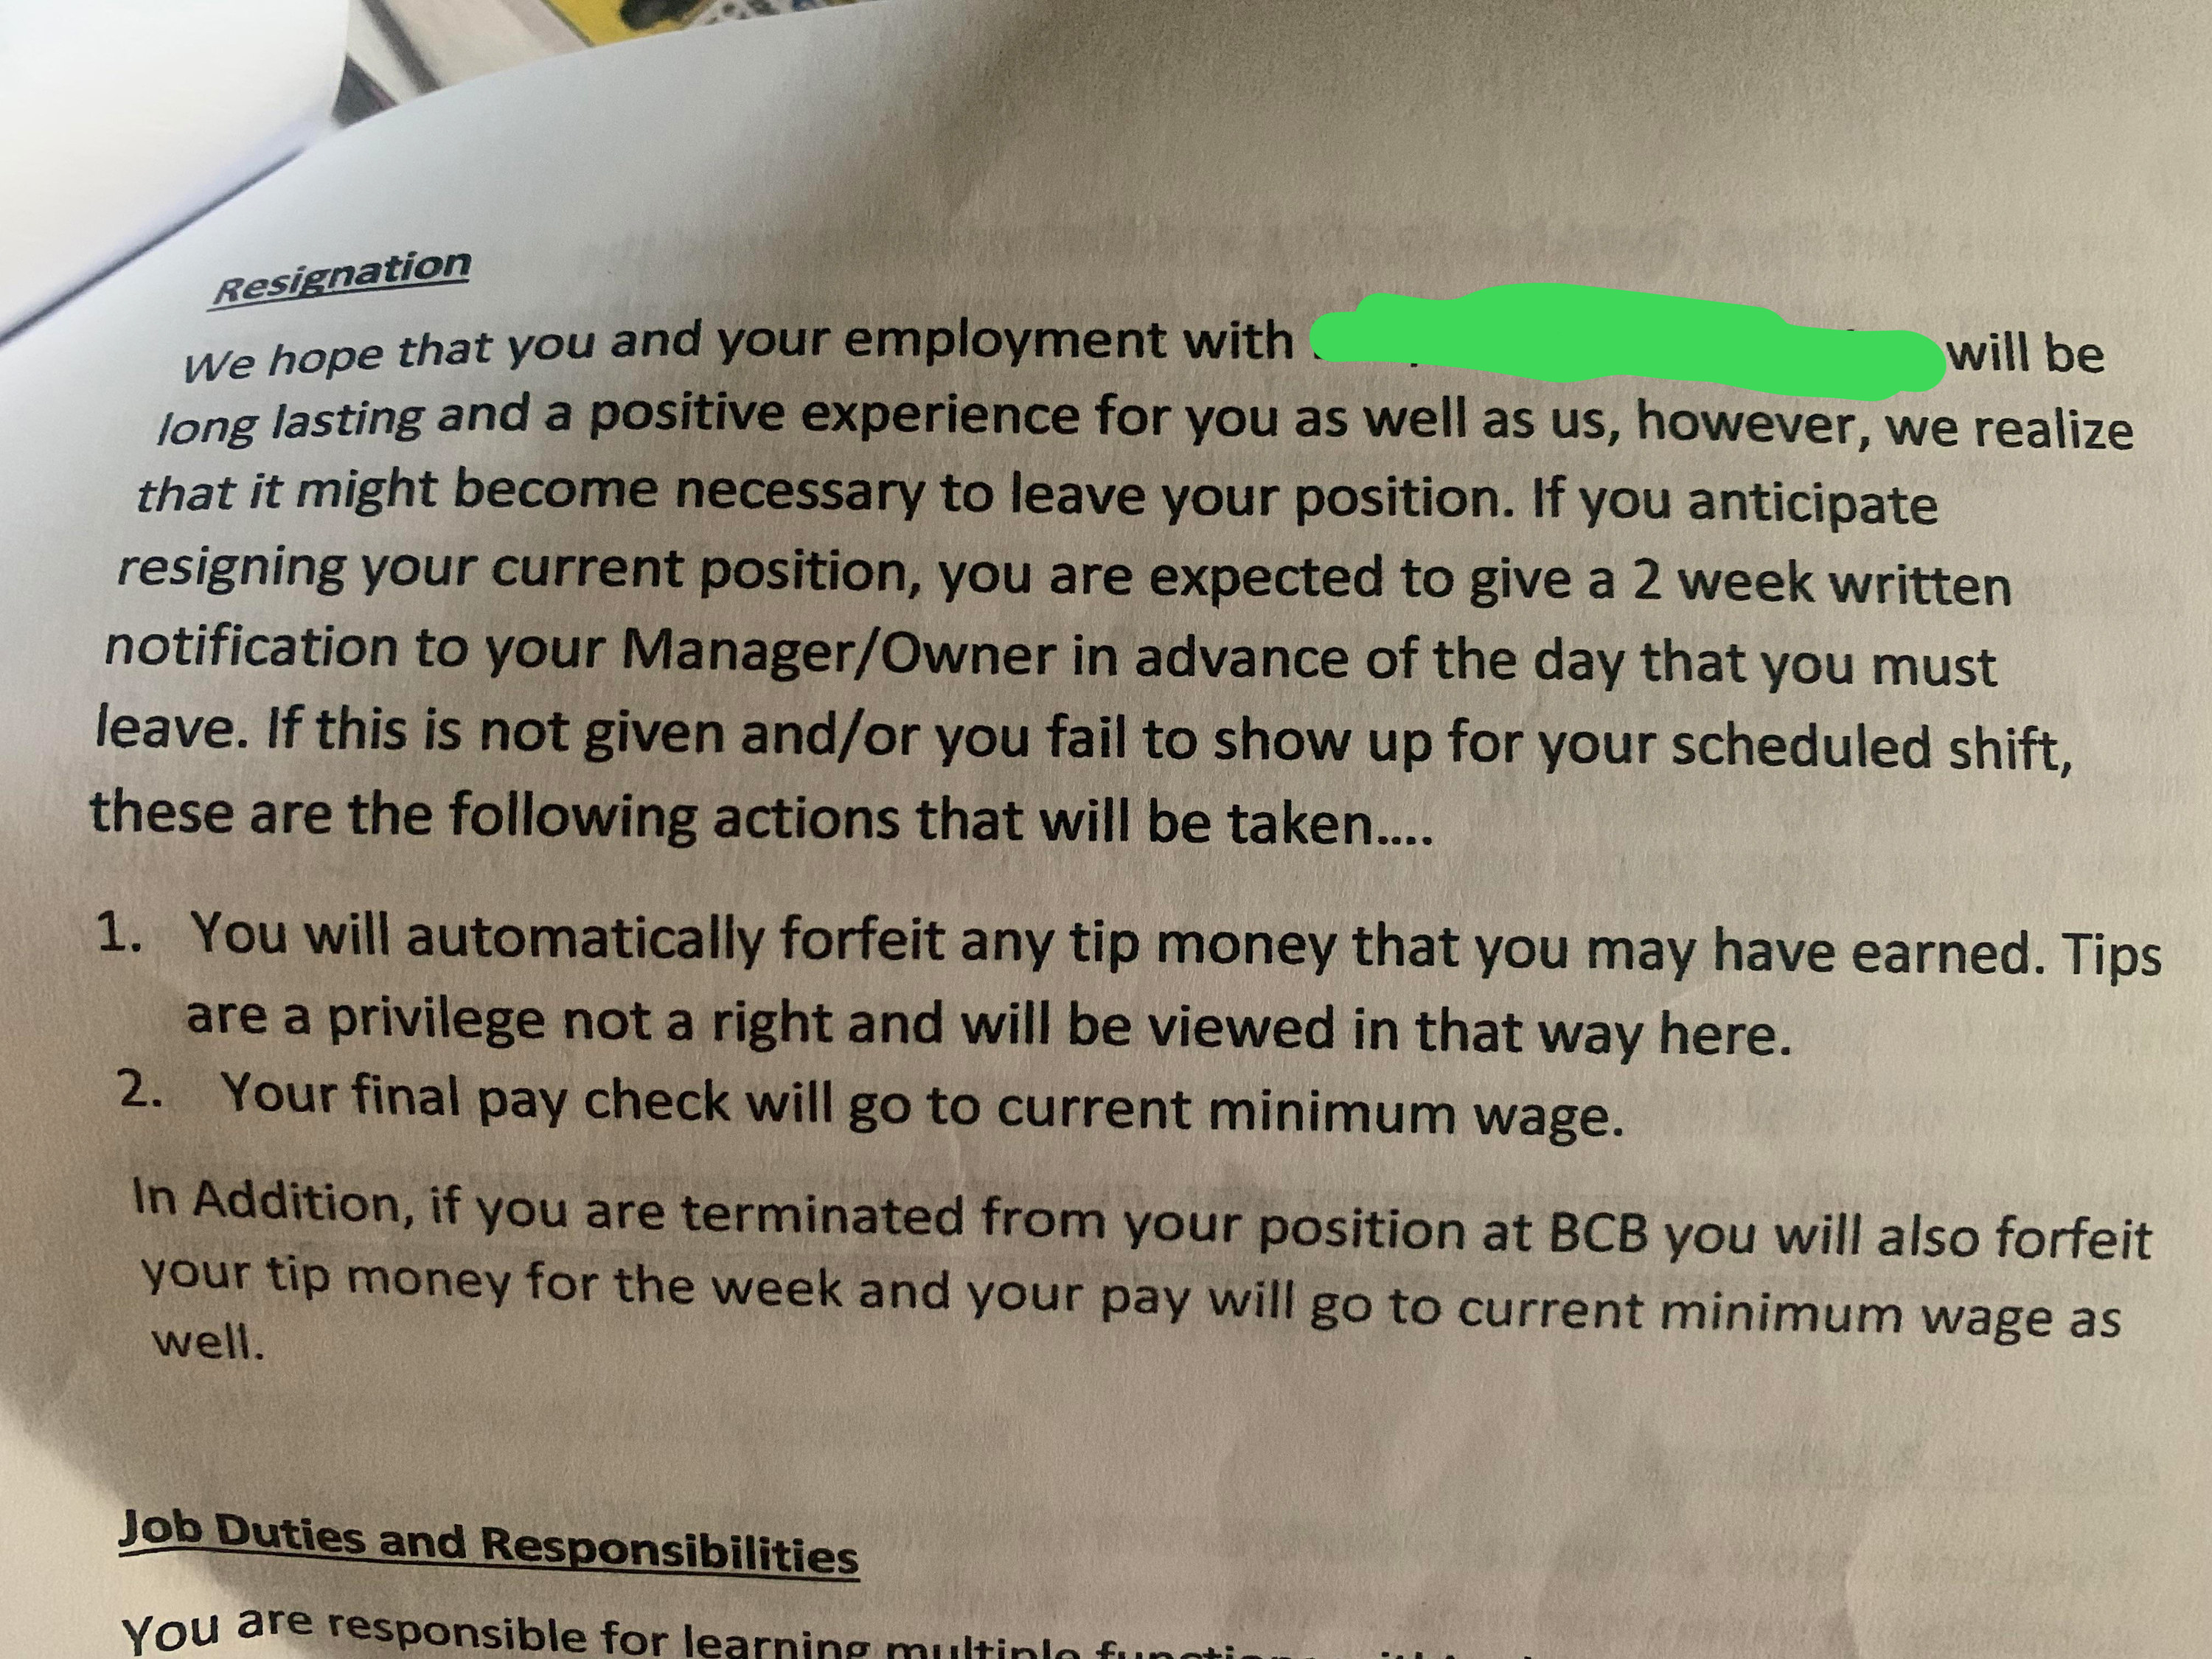 A note from an employer showing the consequences of quitting the job